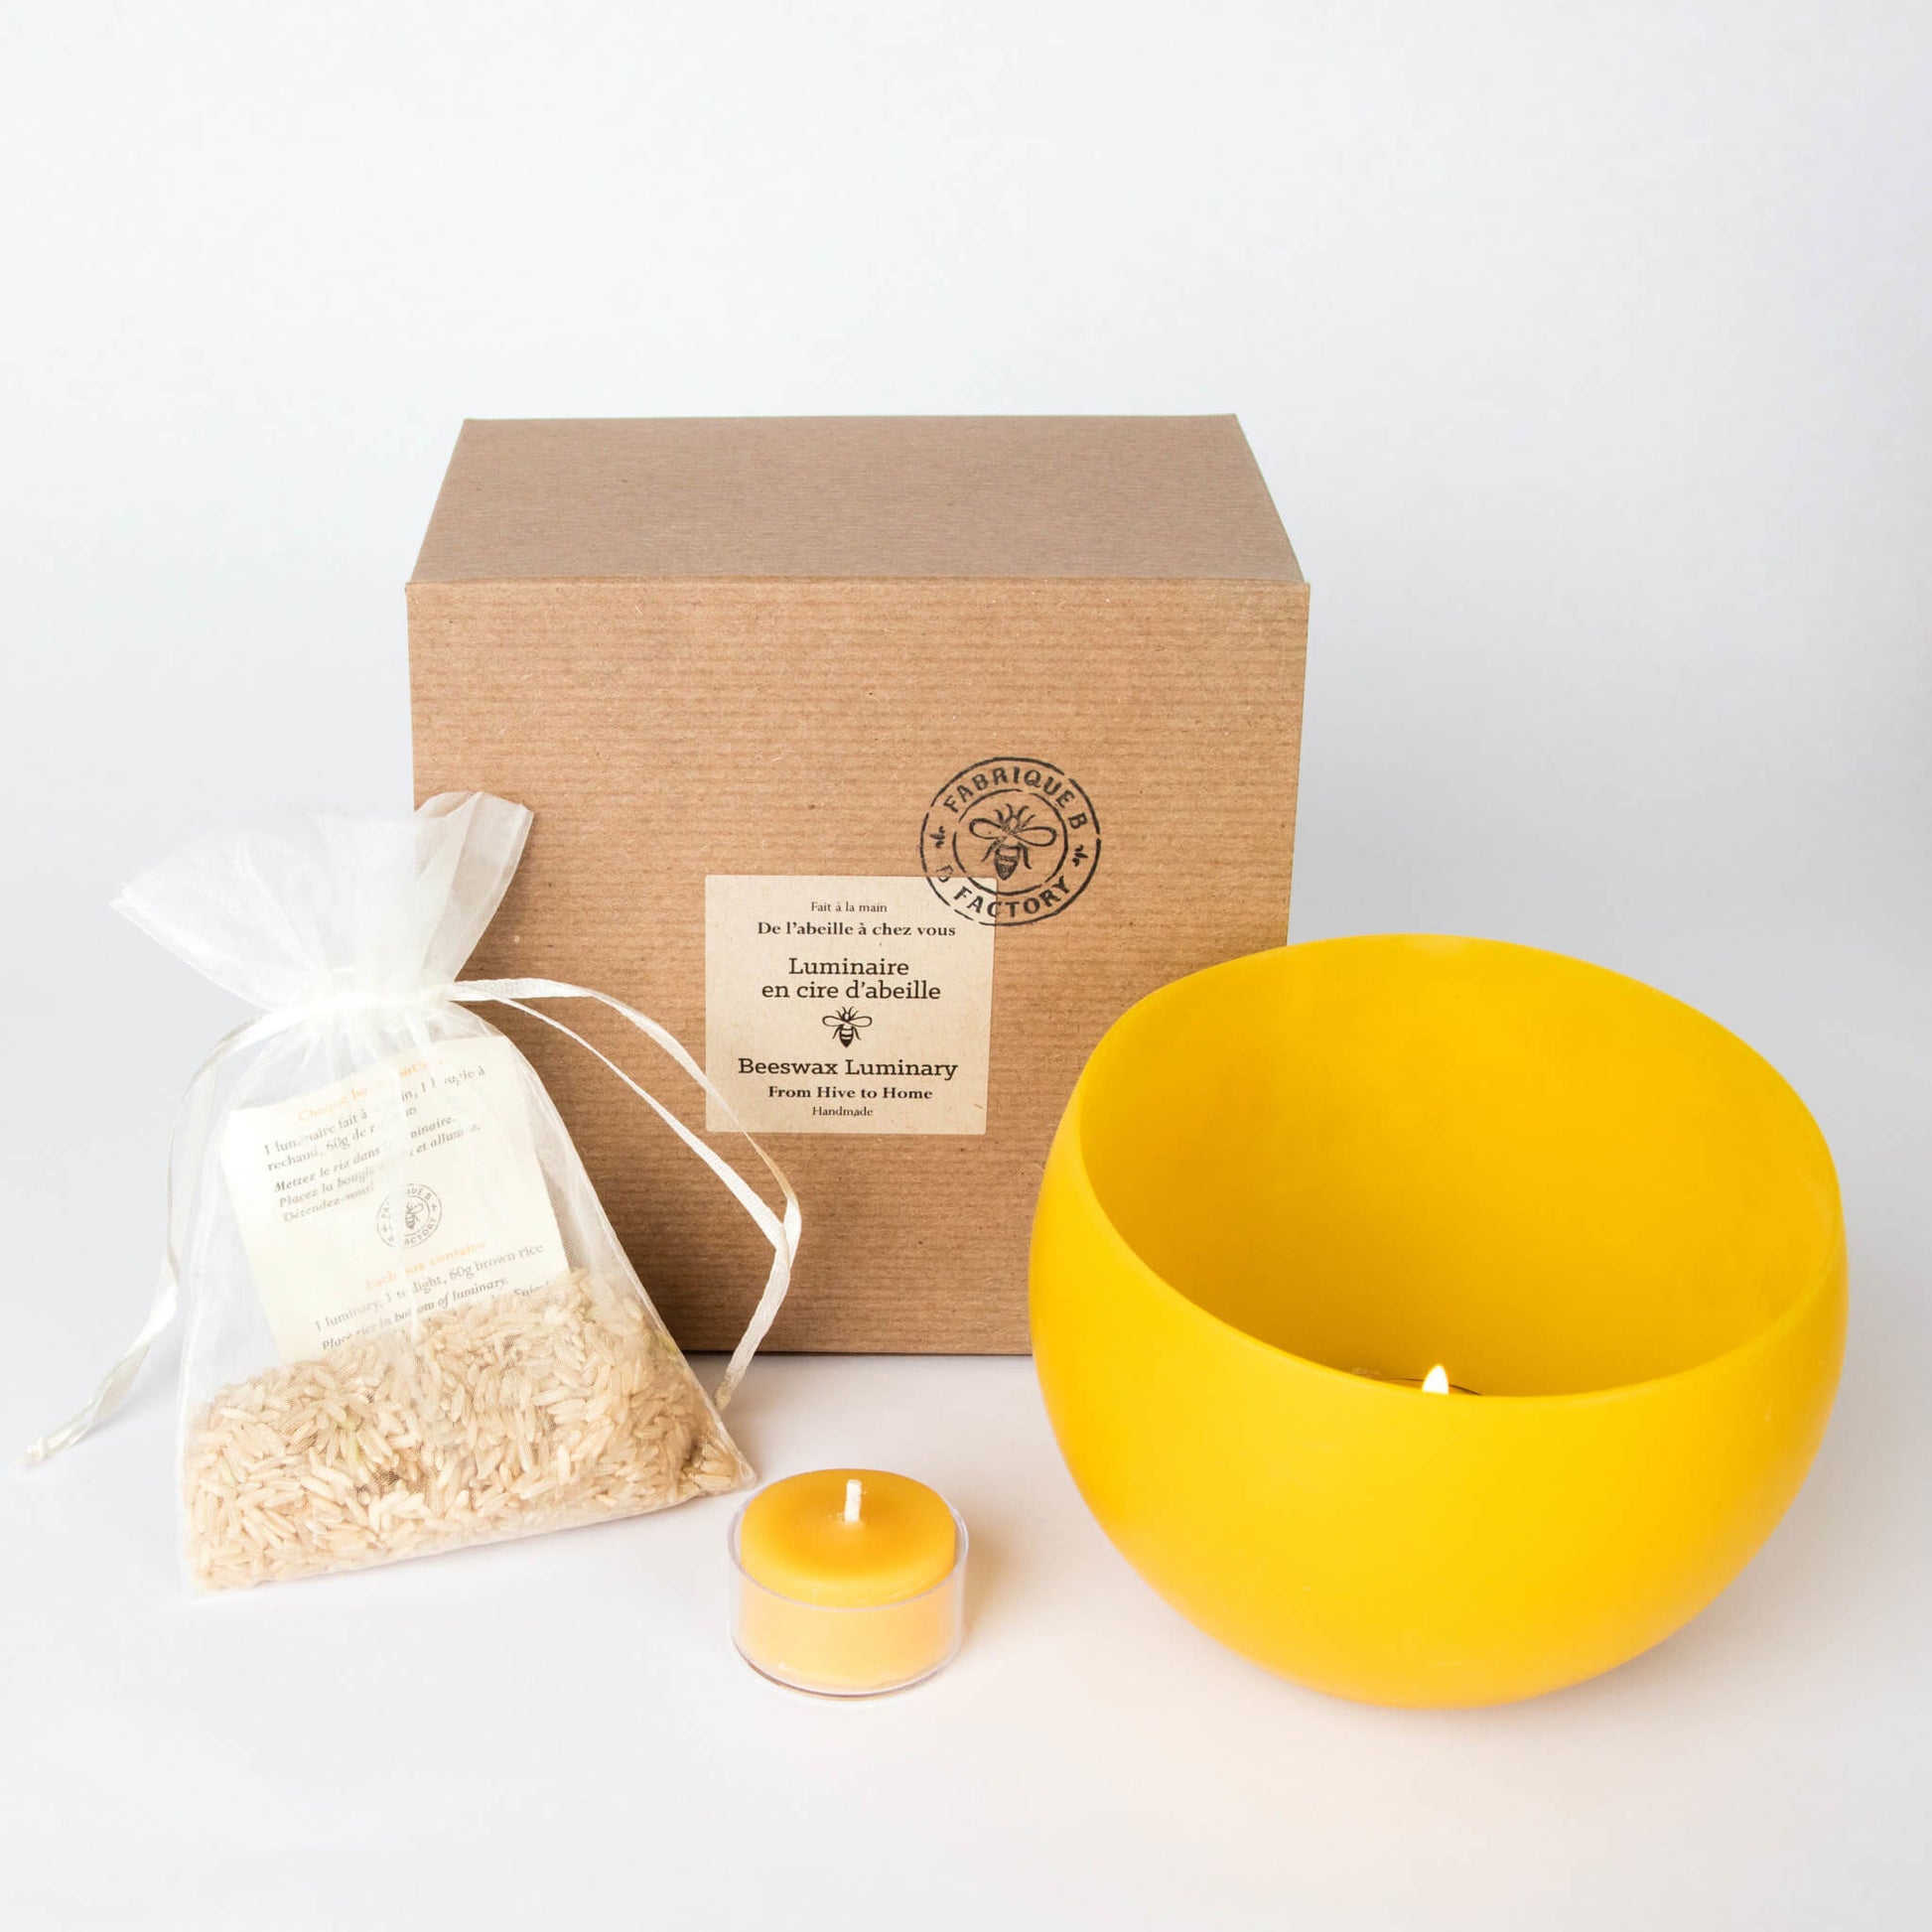 Beeswax luminary next to bag of brown rice, beeswax tea light candle in glass cup, and gift box with B Factory logo